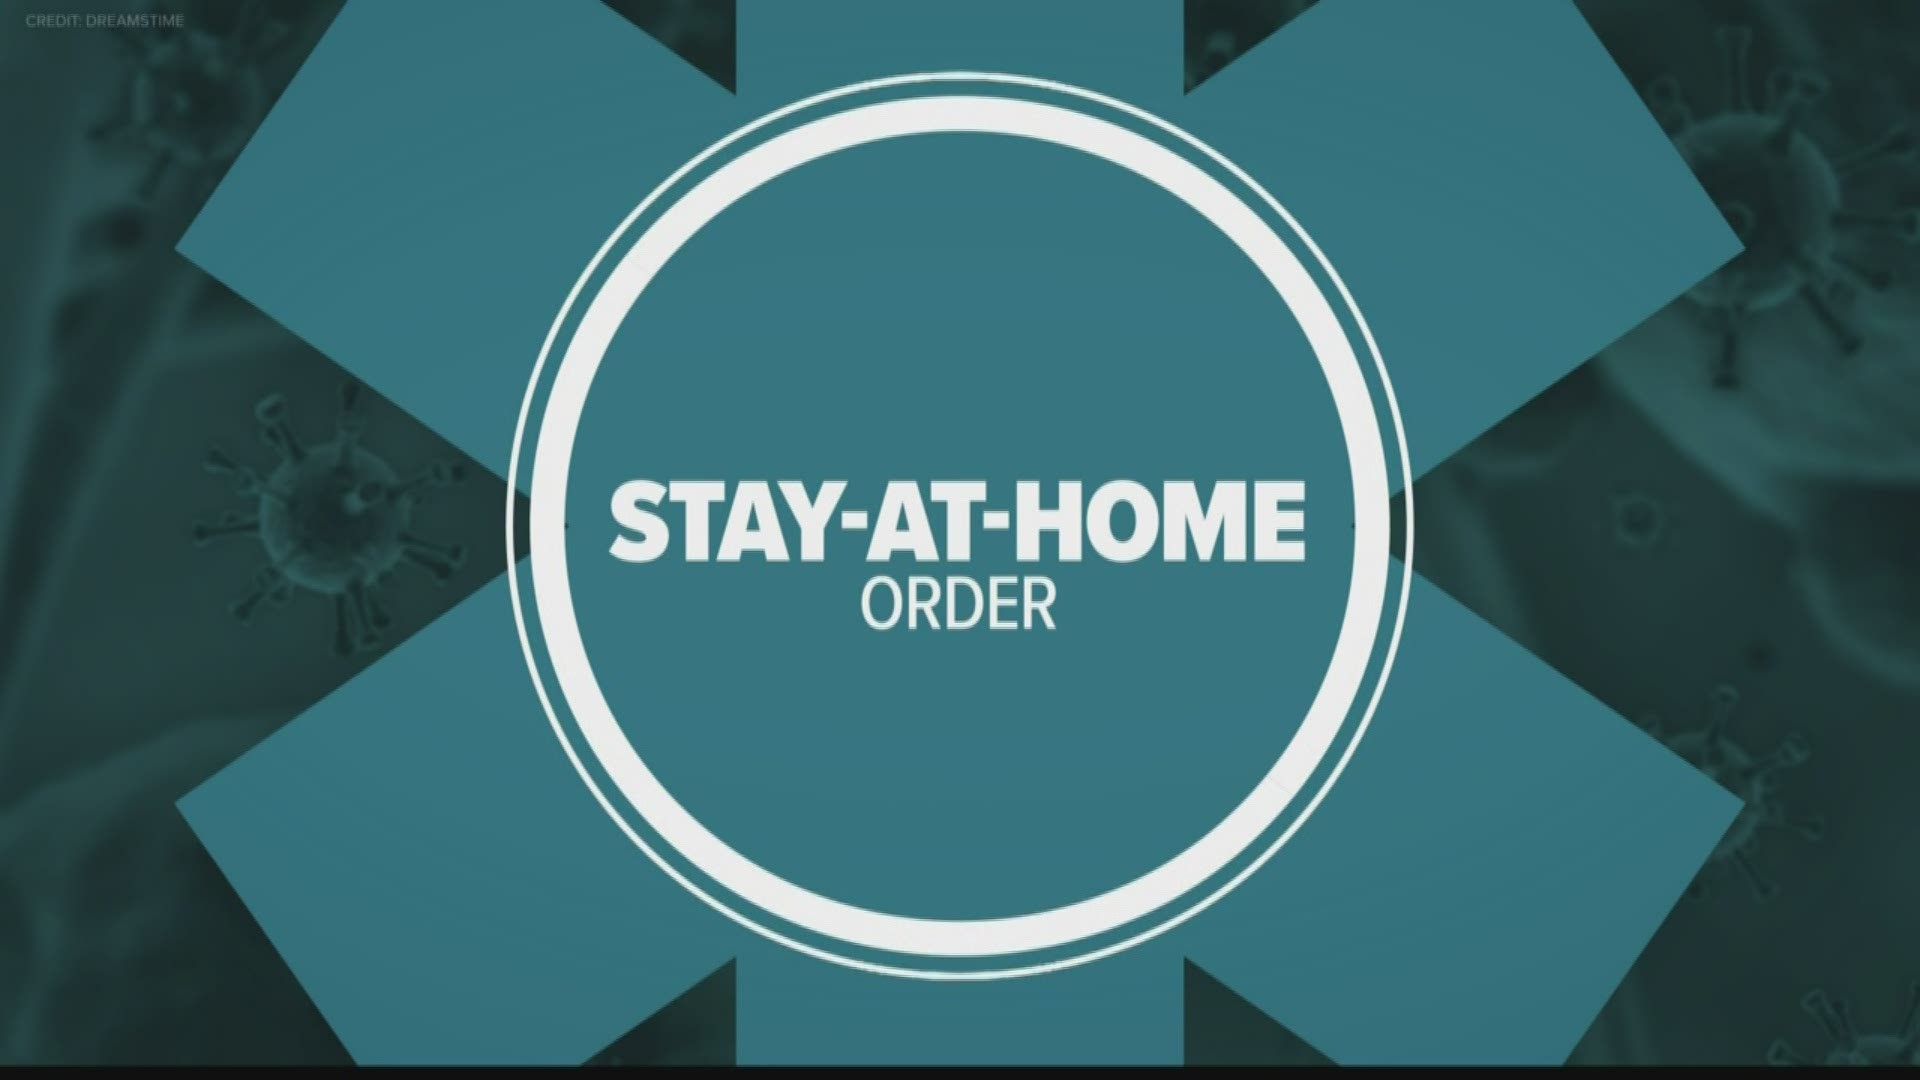 If you live in Columbia how the stay at home order might affect you